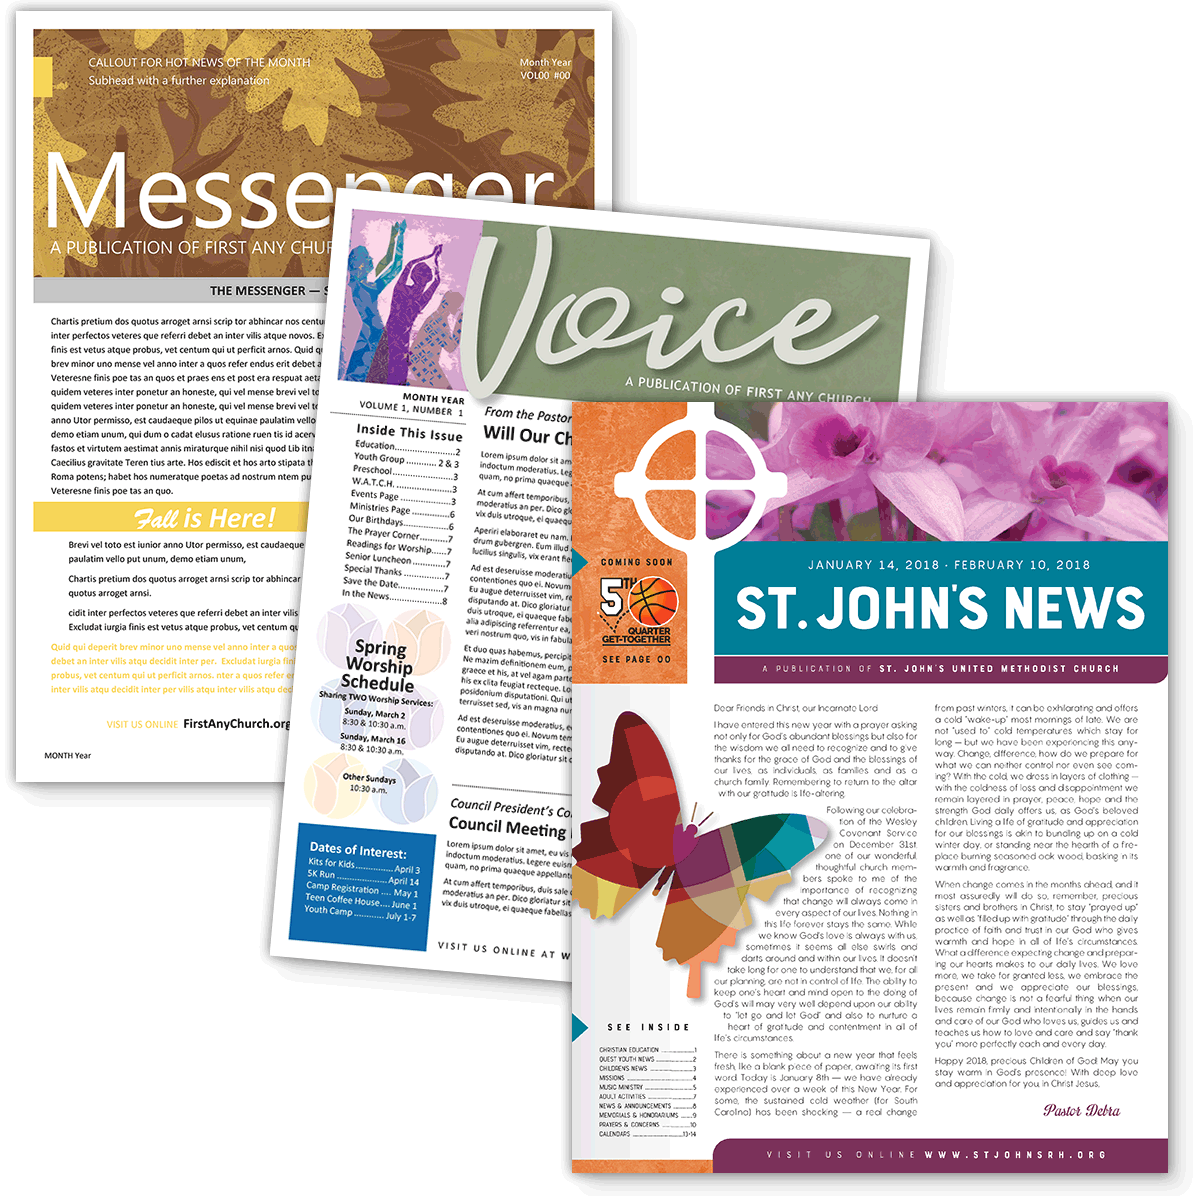 The NEWSLETTER Newsletter Church newsletter resource for art and content for more than 40 years.